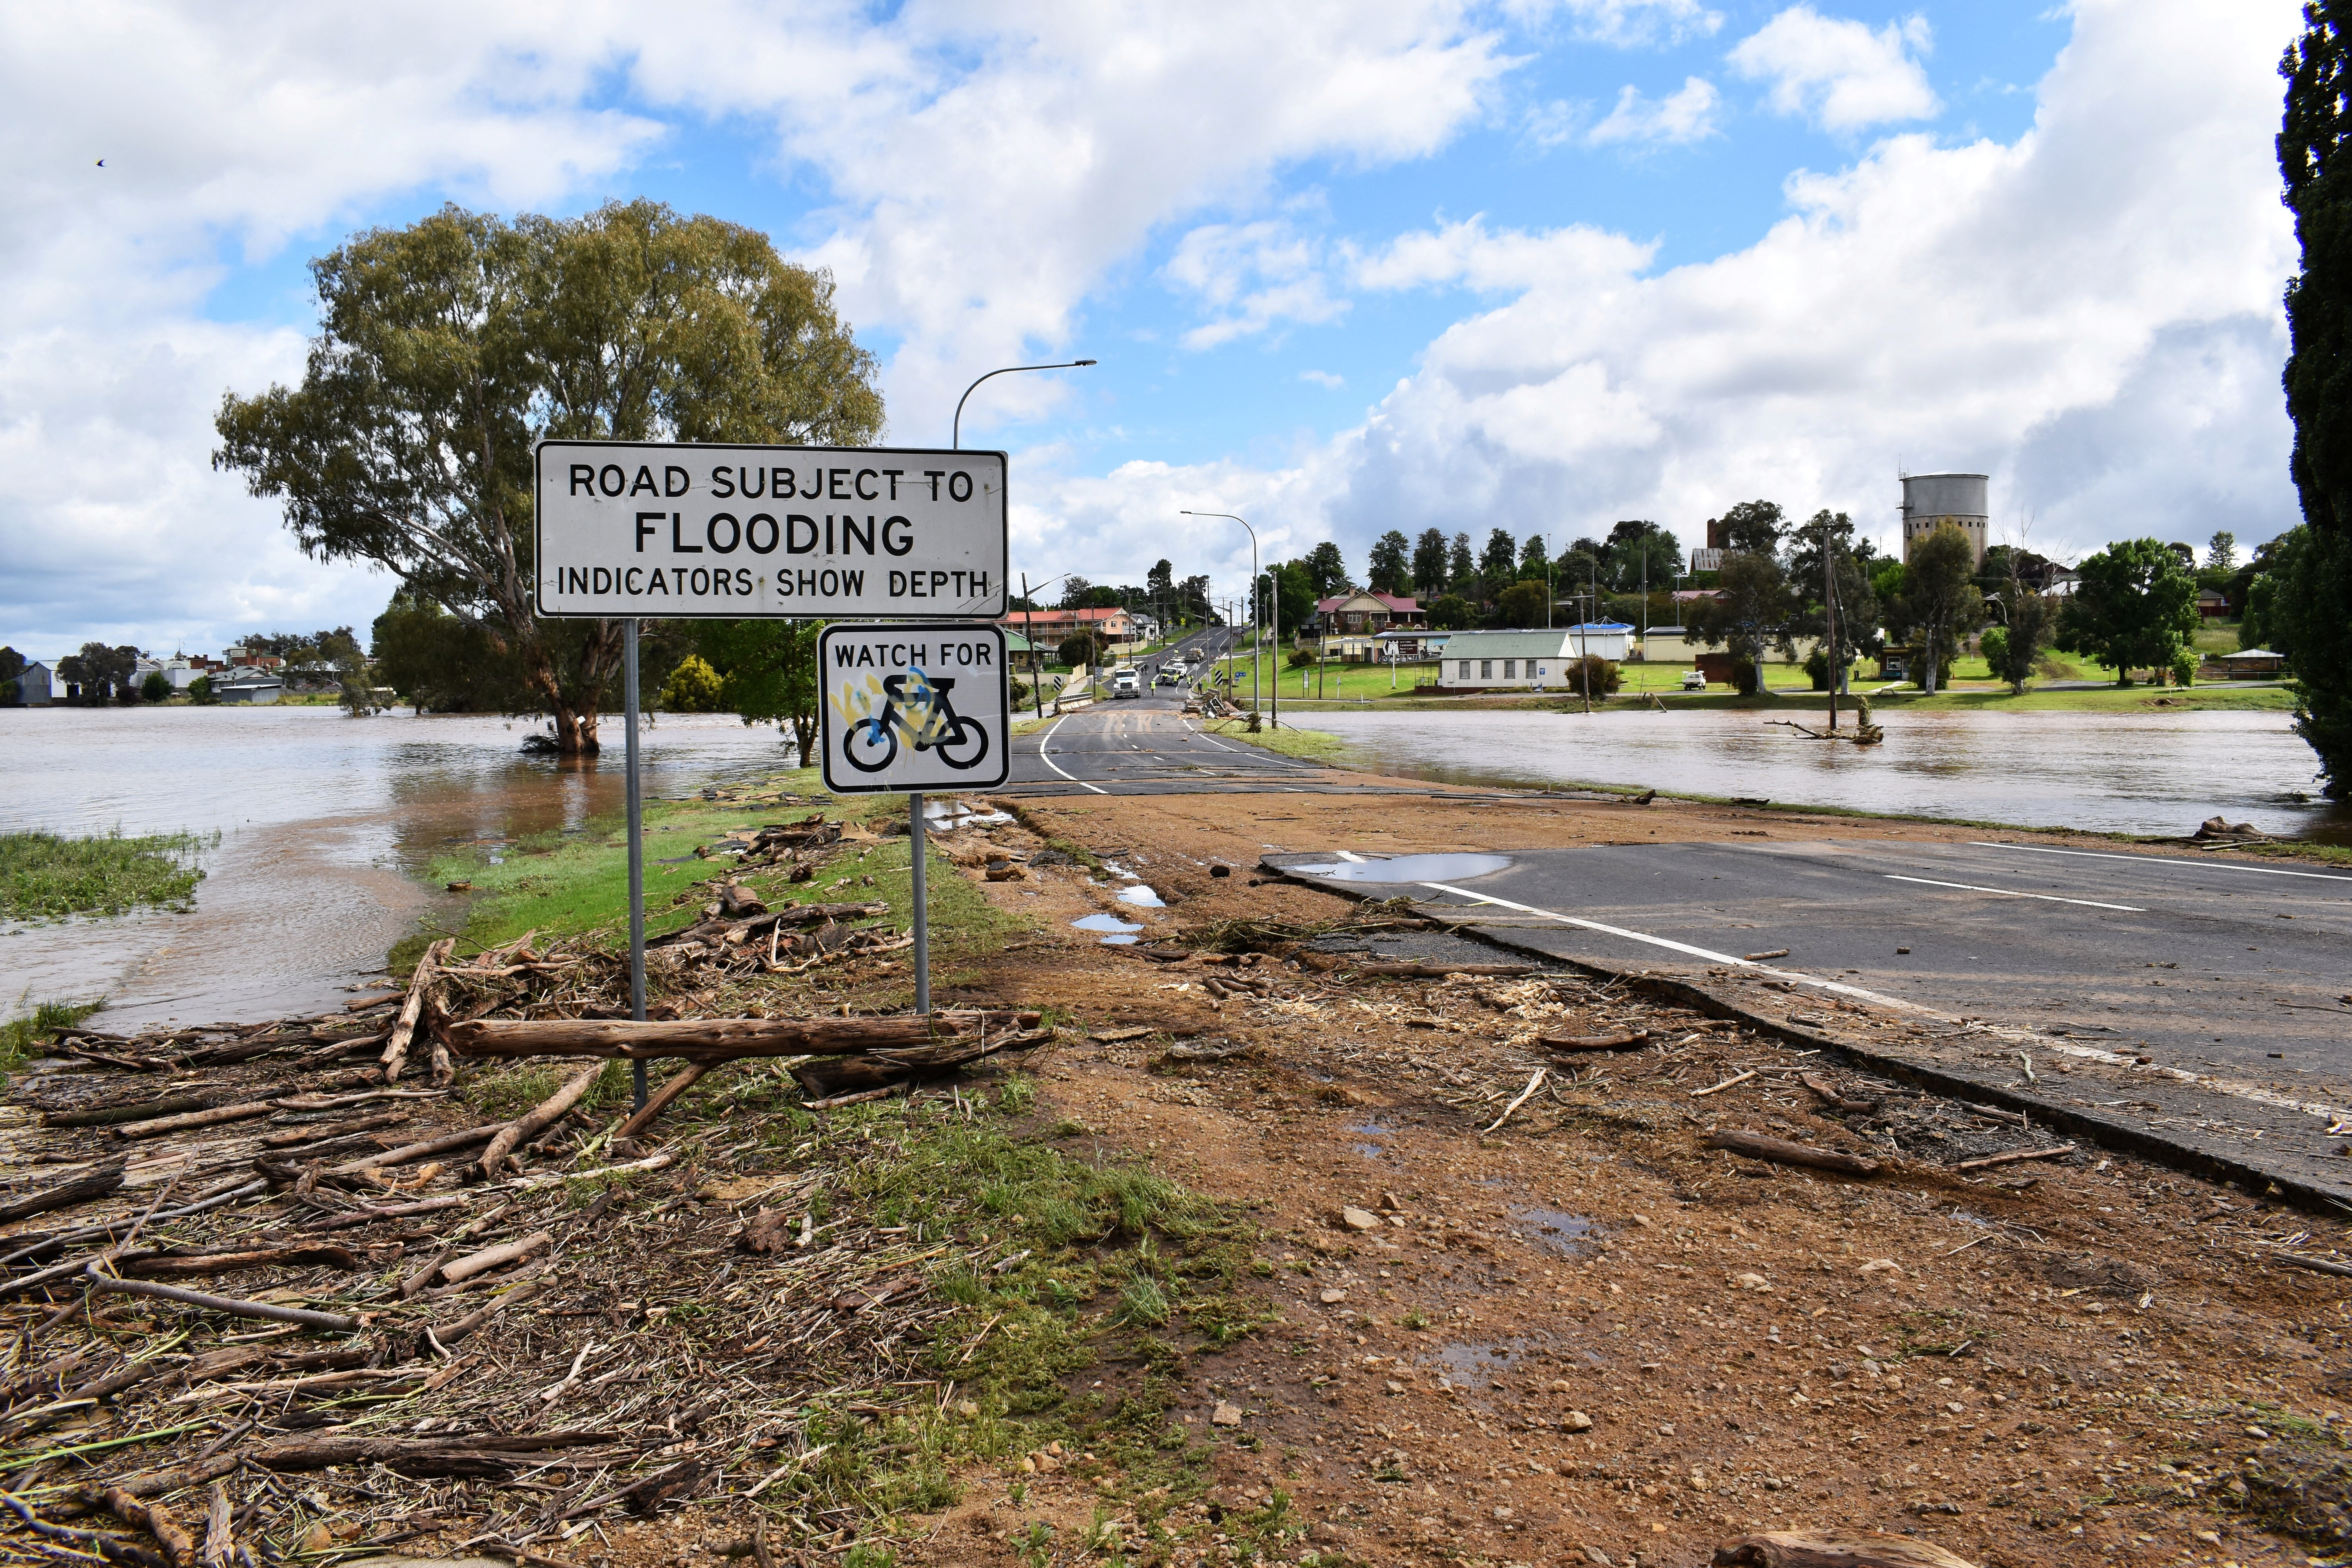 A damaged road is seen following flooding in the town of Canowindra, in the Central West region of New South Wales, Australia, November 15, 2022. AAP Image/Murray McCloskey via REUTERS